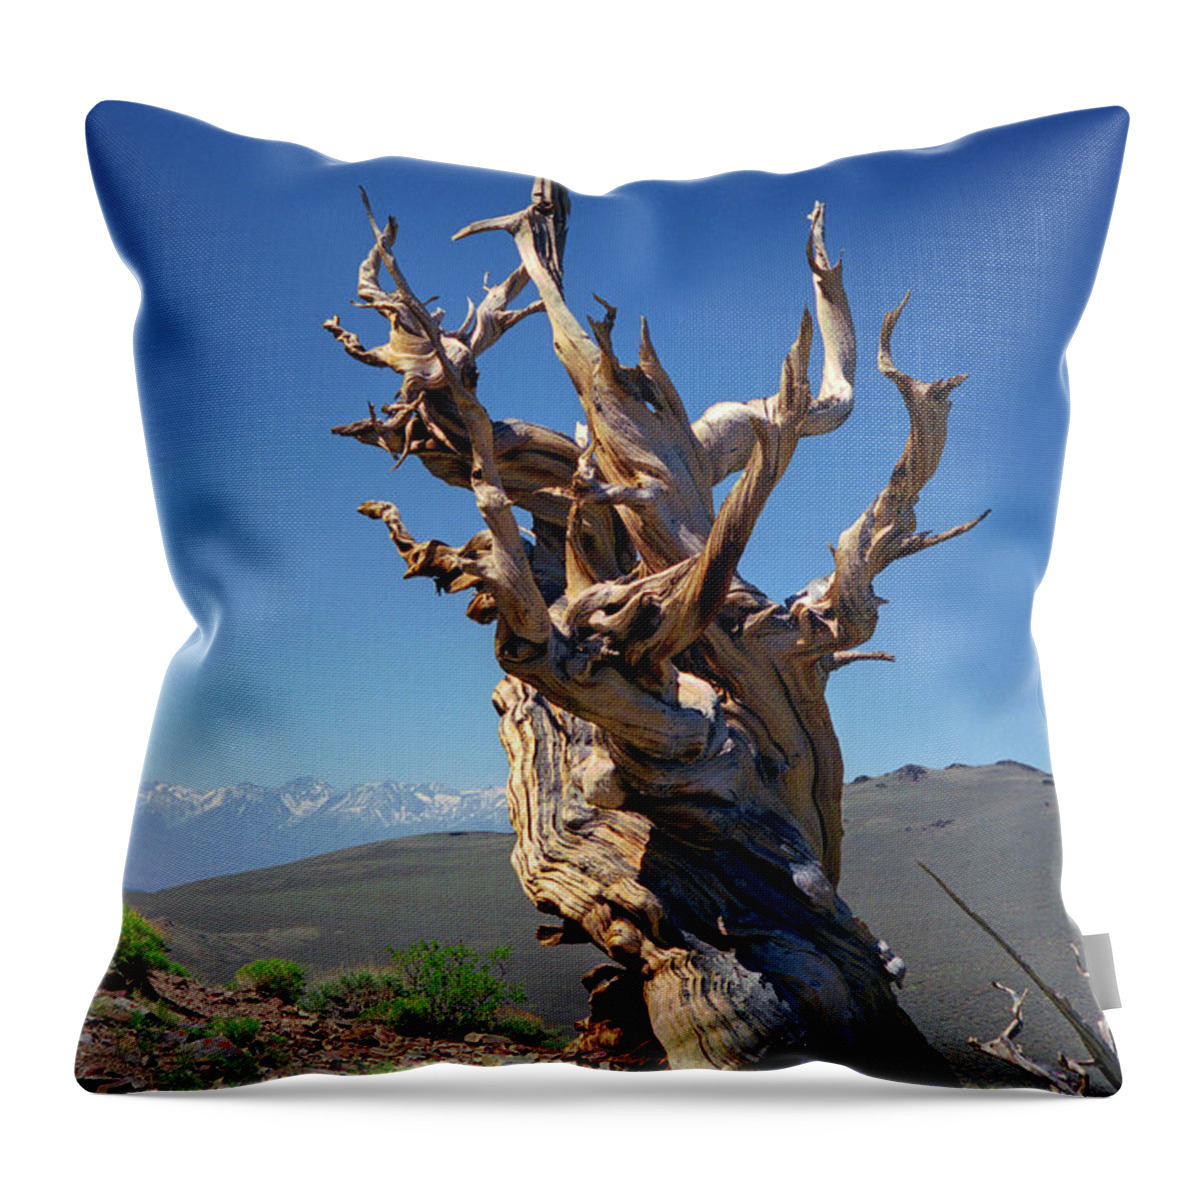 Bristlecone Pine Throw Pillow featuring the photograph Ancient Bristlecone Pine Tree Composition 2, Inyo National Forest, White Mountains, California by Kathy Anselmo